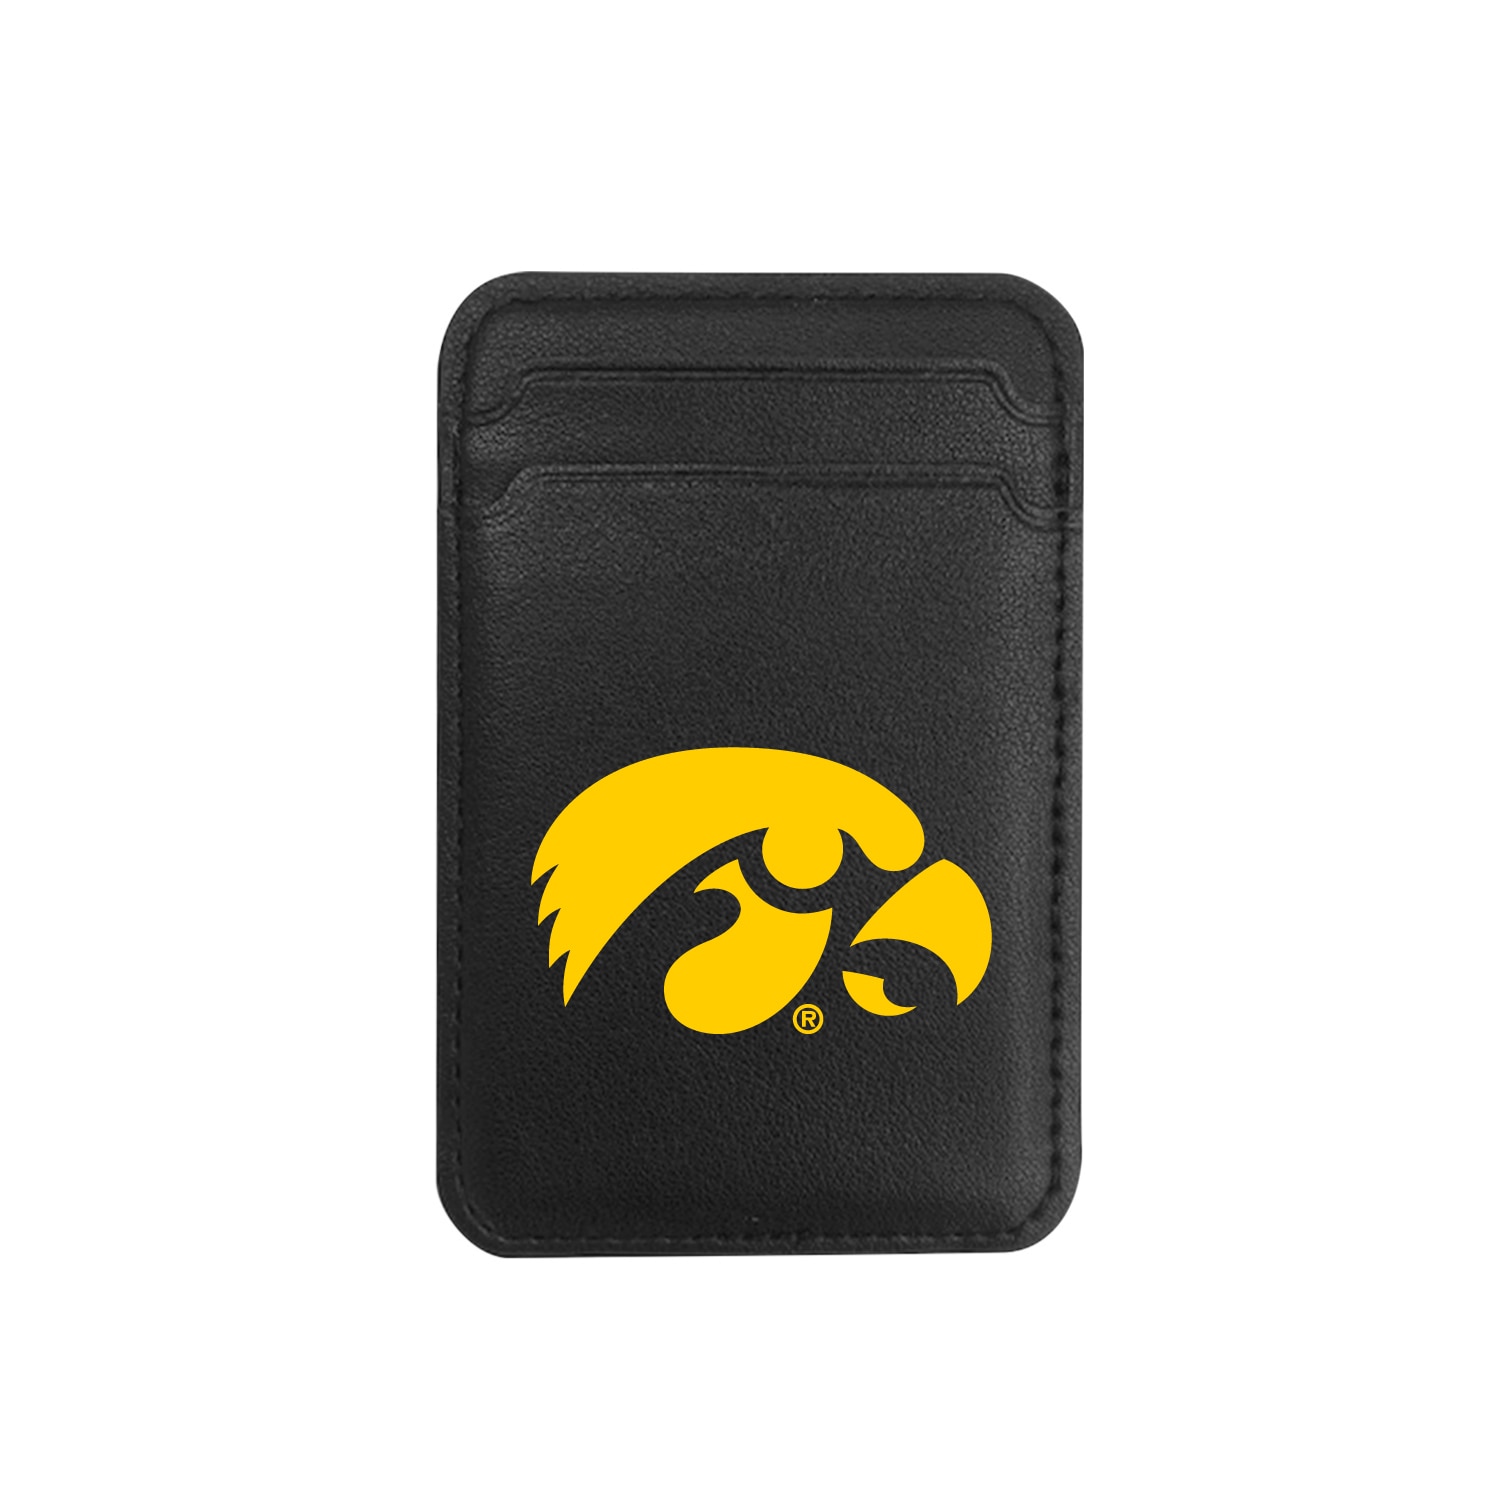 The University of Iowa V2 - Leather Wallet Sleeve (Top Load, Mag Safe), Black, Classic V1